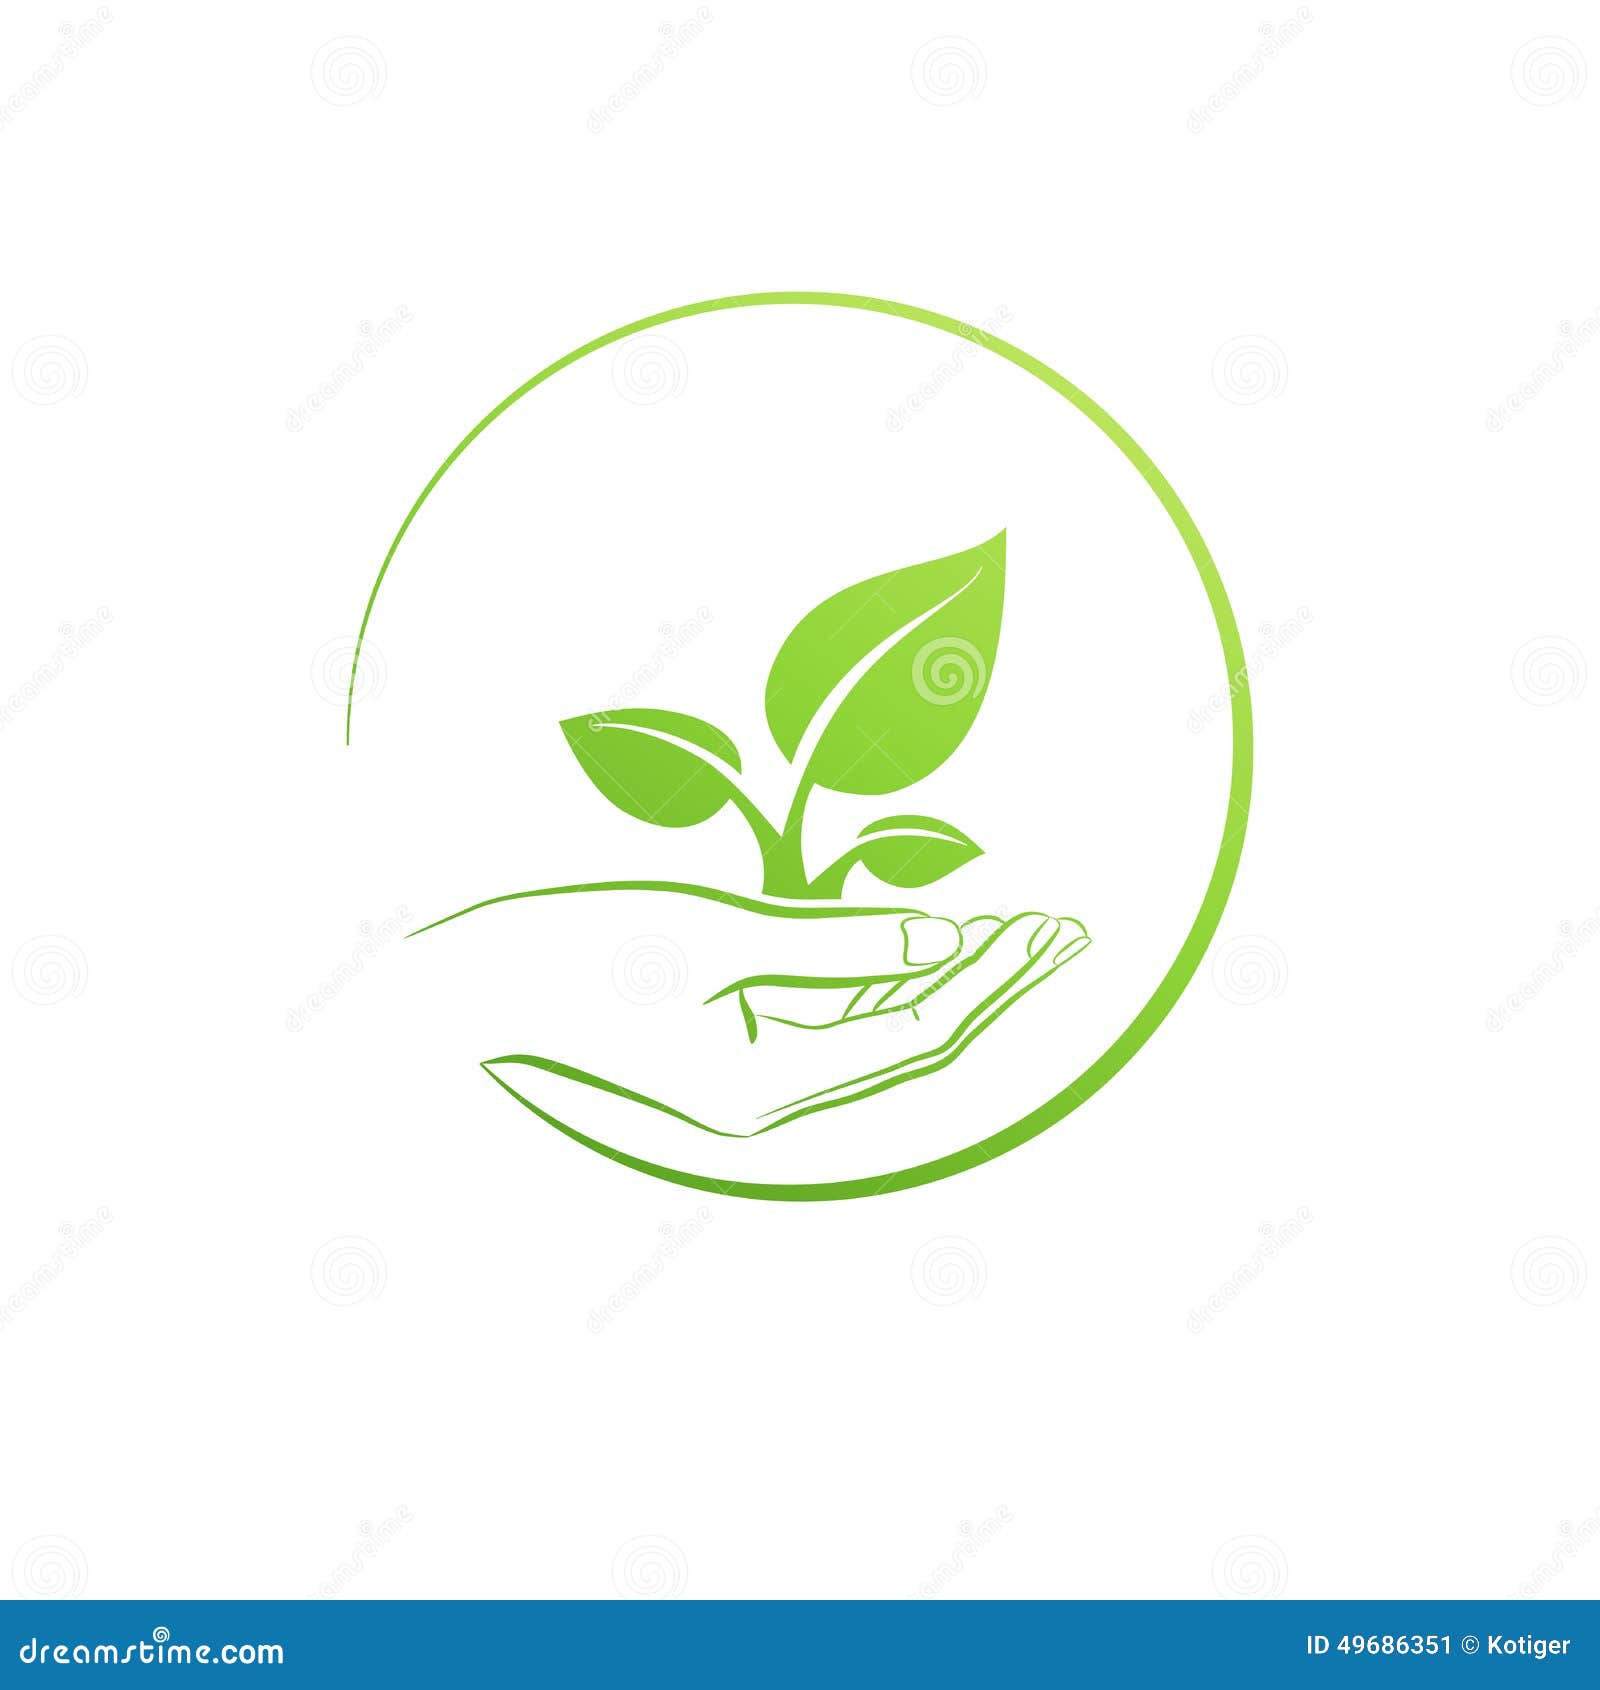 hand holding plant, logo growth concept 